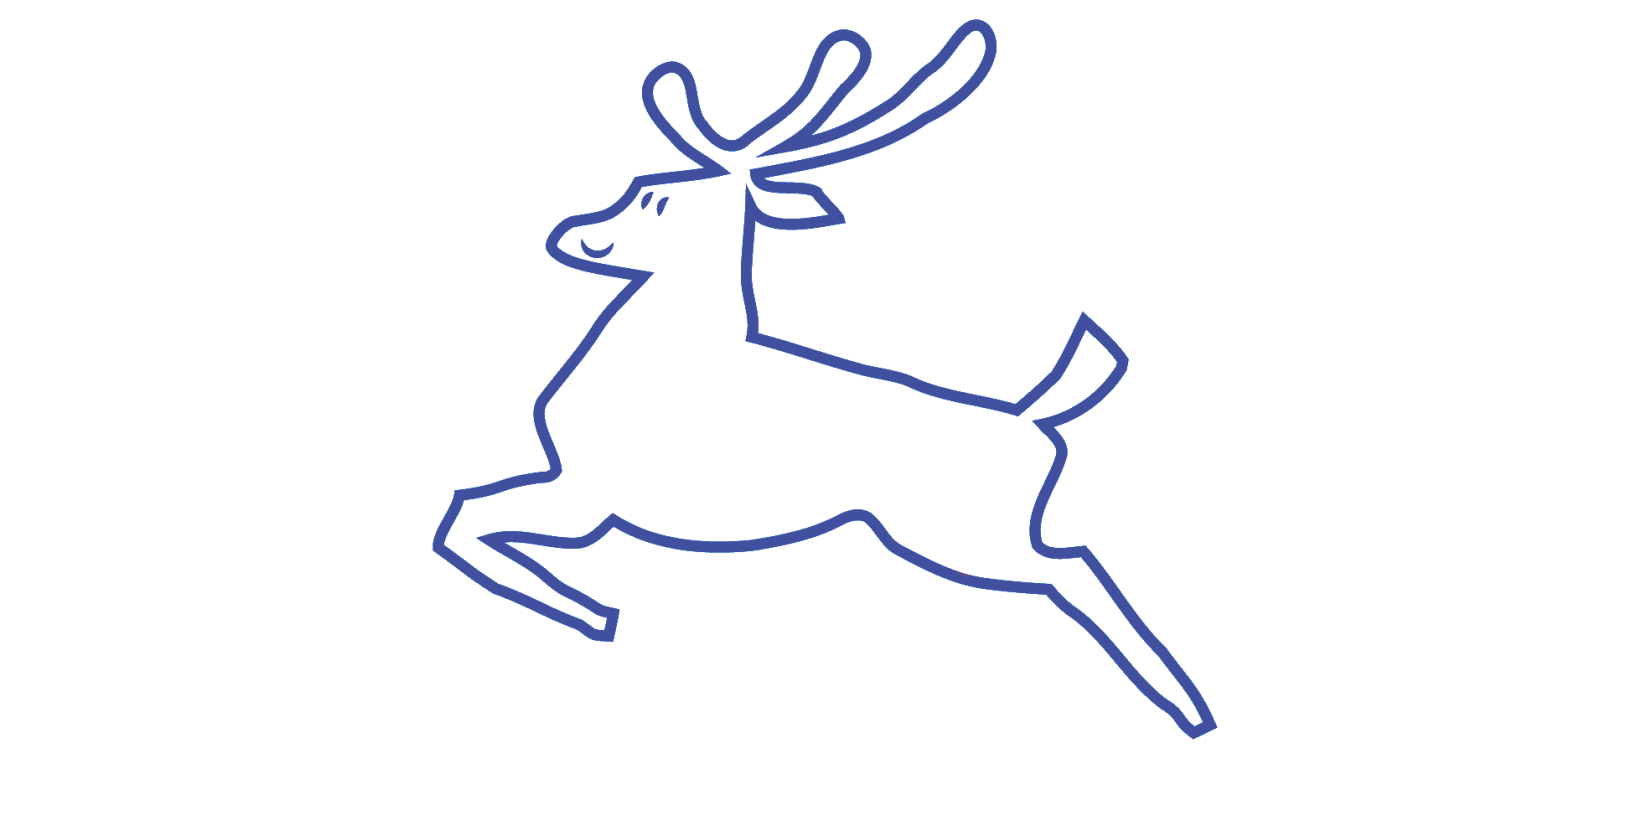 Image of the famous Portland stag.